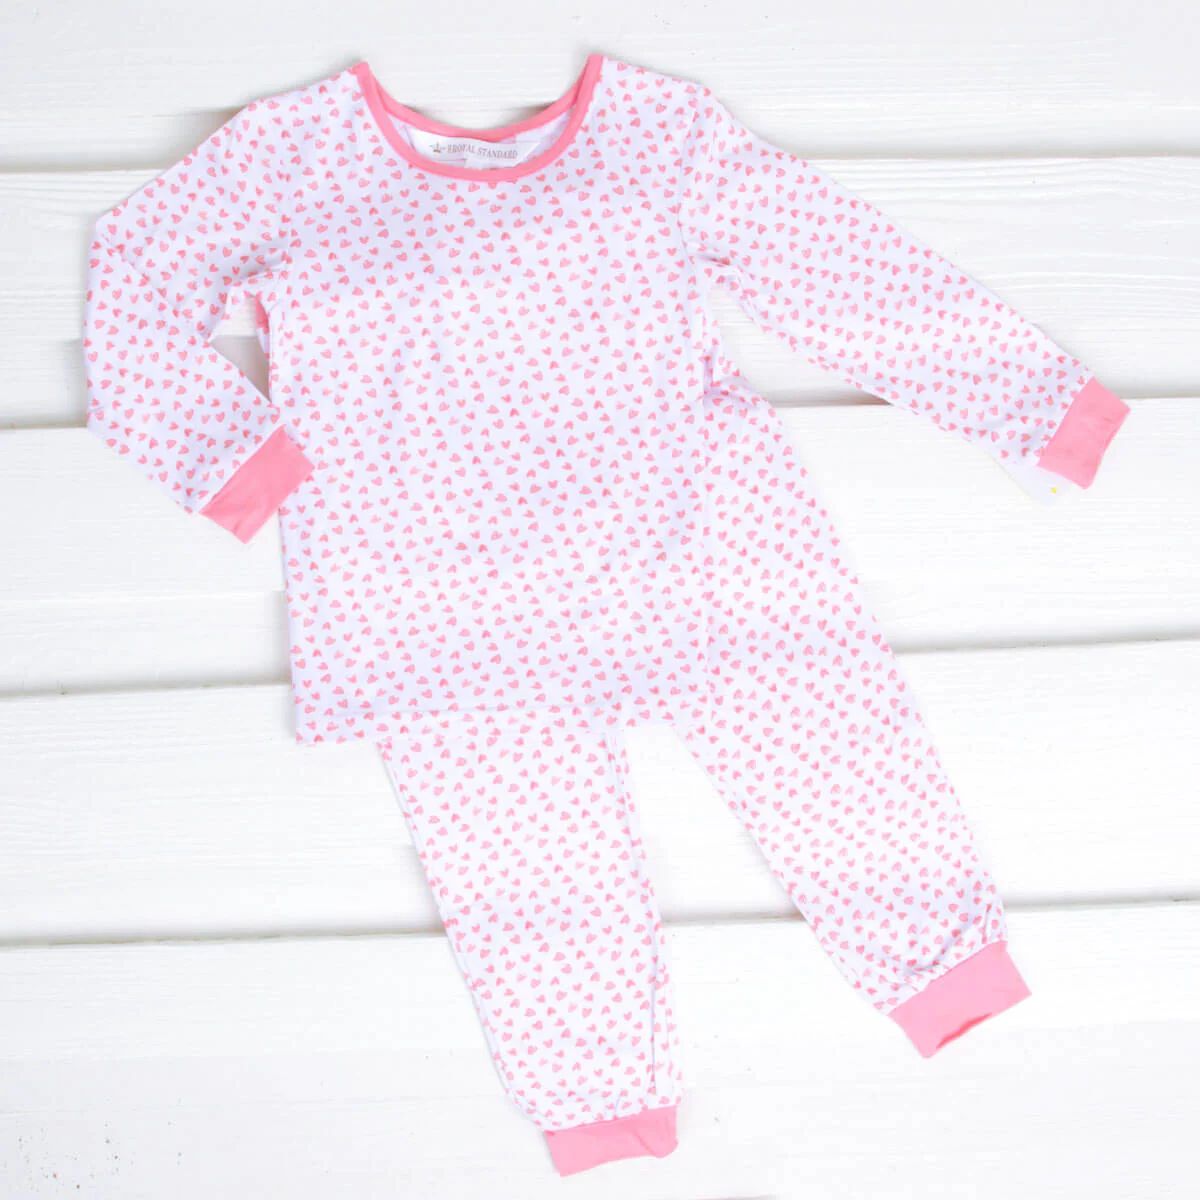 Sweetheart Pajamas White and Pink | Classic Whimsy